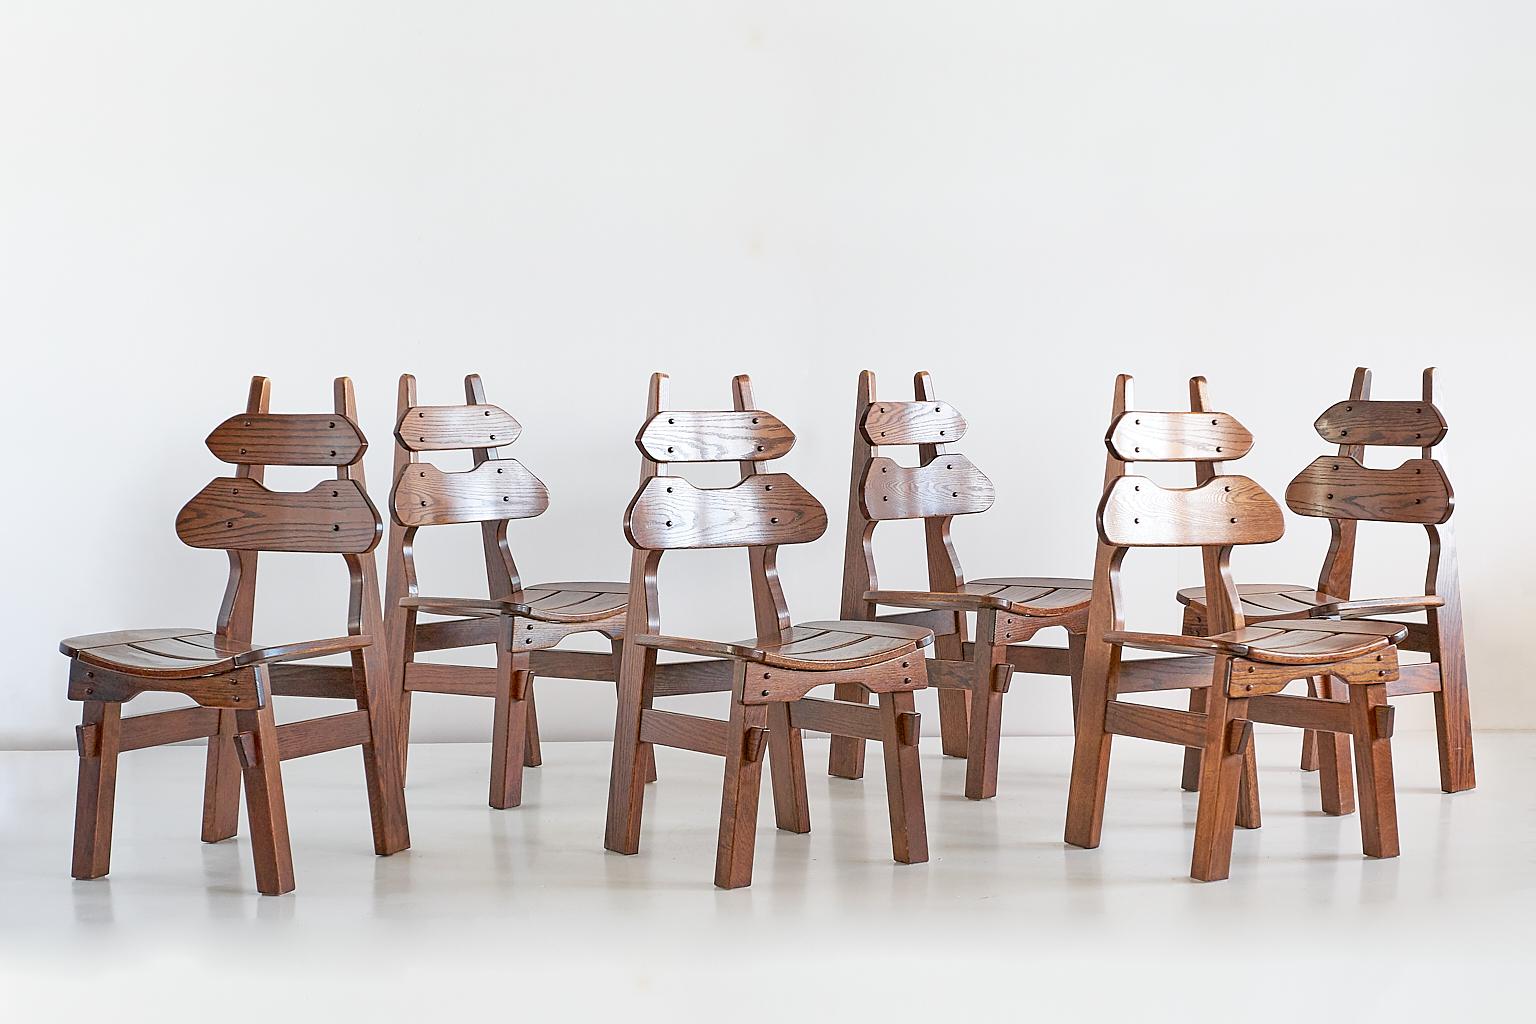 This impressive set of six Brutalist dining chairs was produced in Spain in the 1970s. The well constructed chairs are made of solid oak, with the striking grain of the wood highlighted by the dark stain finish. The slightly curved backrest and seat